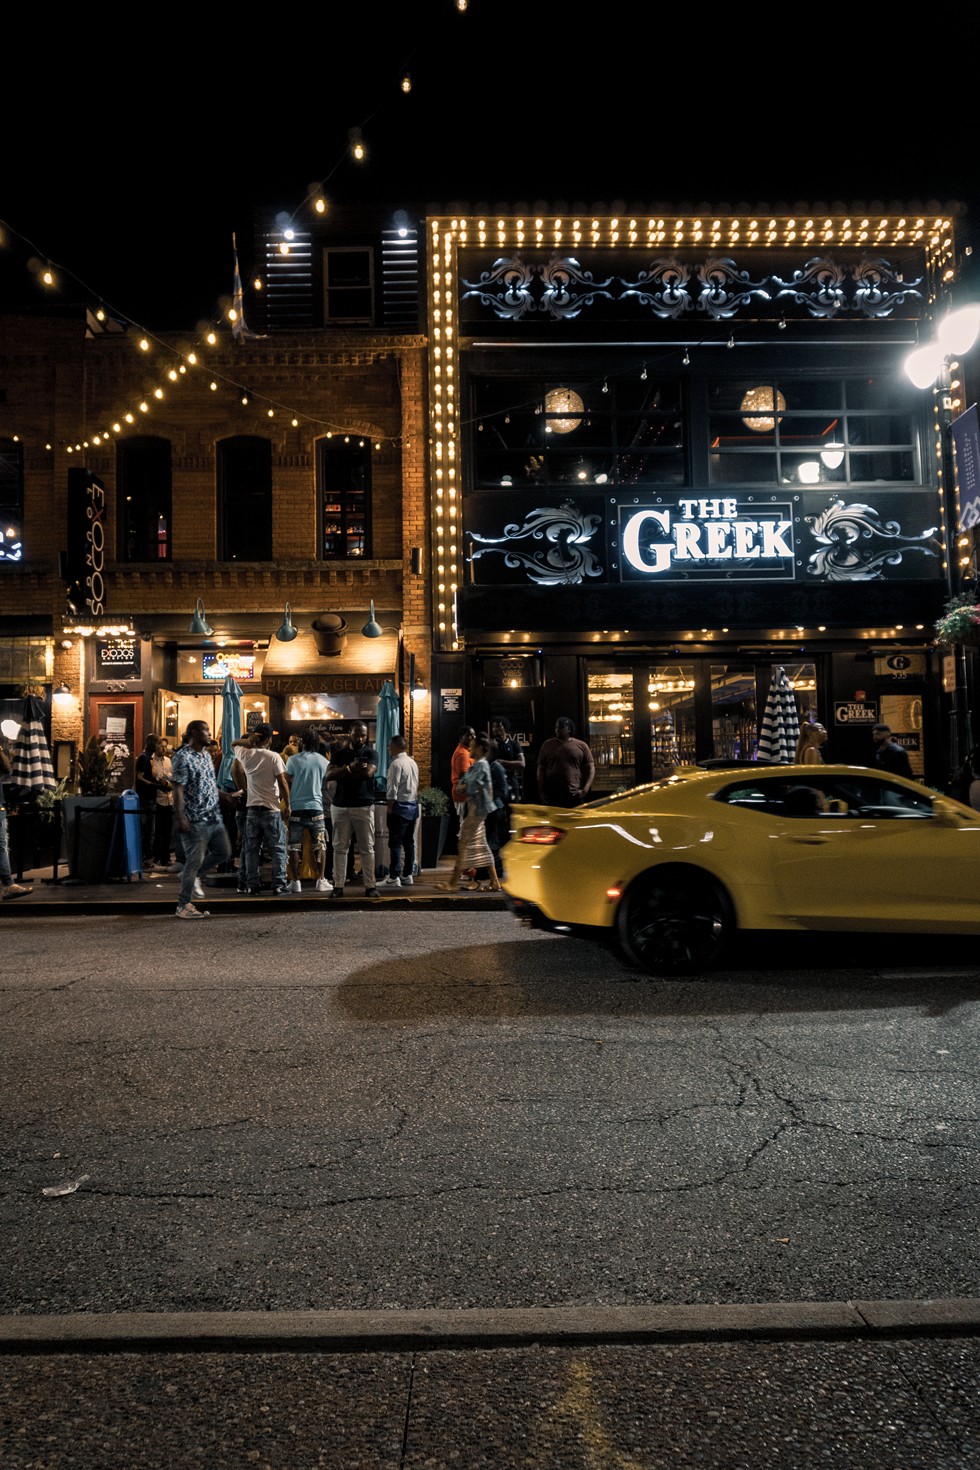 Greektown, like the rest of Michigan's restaurant and entertainment industry, took a major hit as pandemic restrictions forced businesses to temporarily shut their doors to customers in 2020. - se7enfifteen